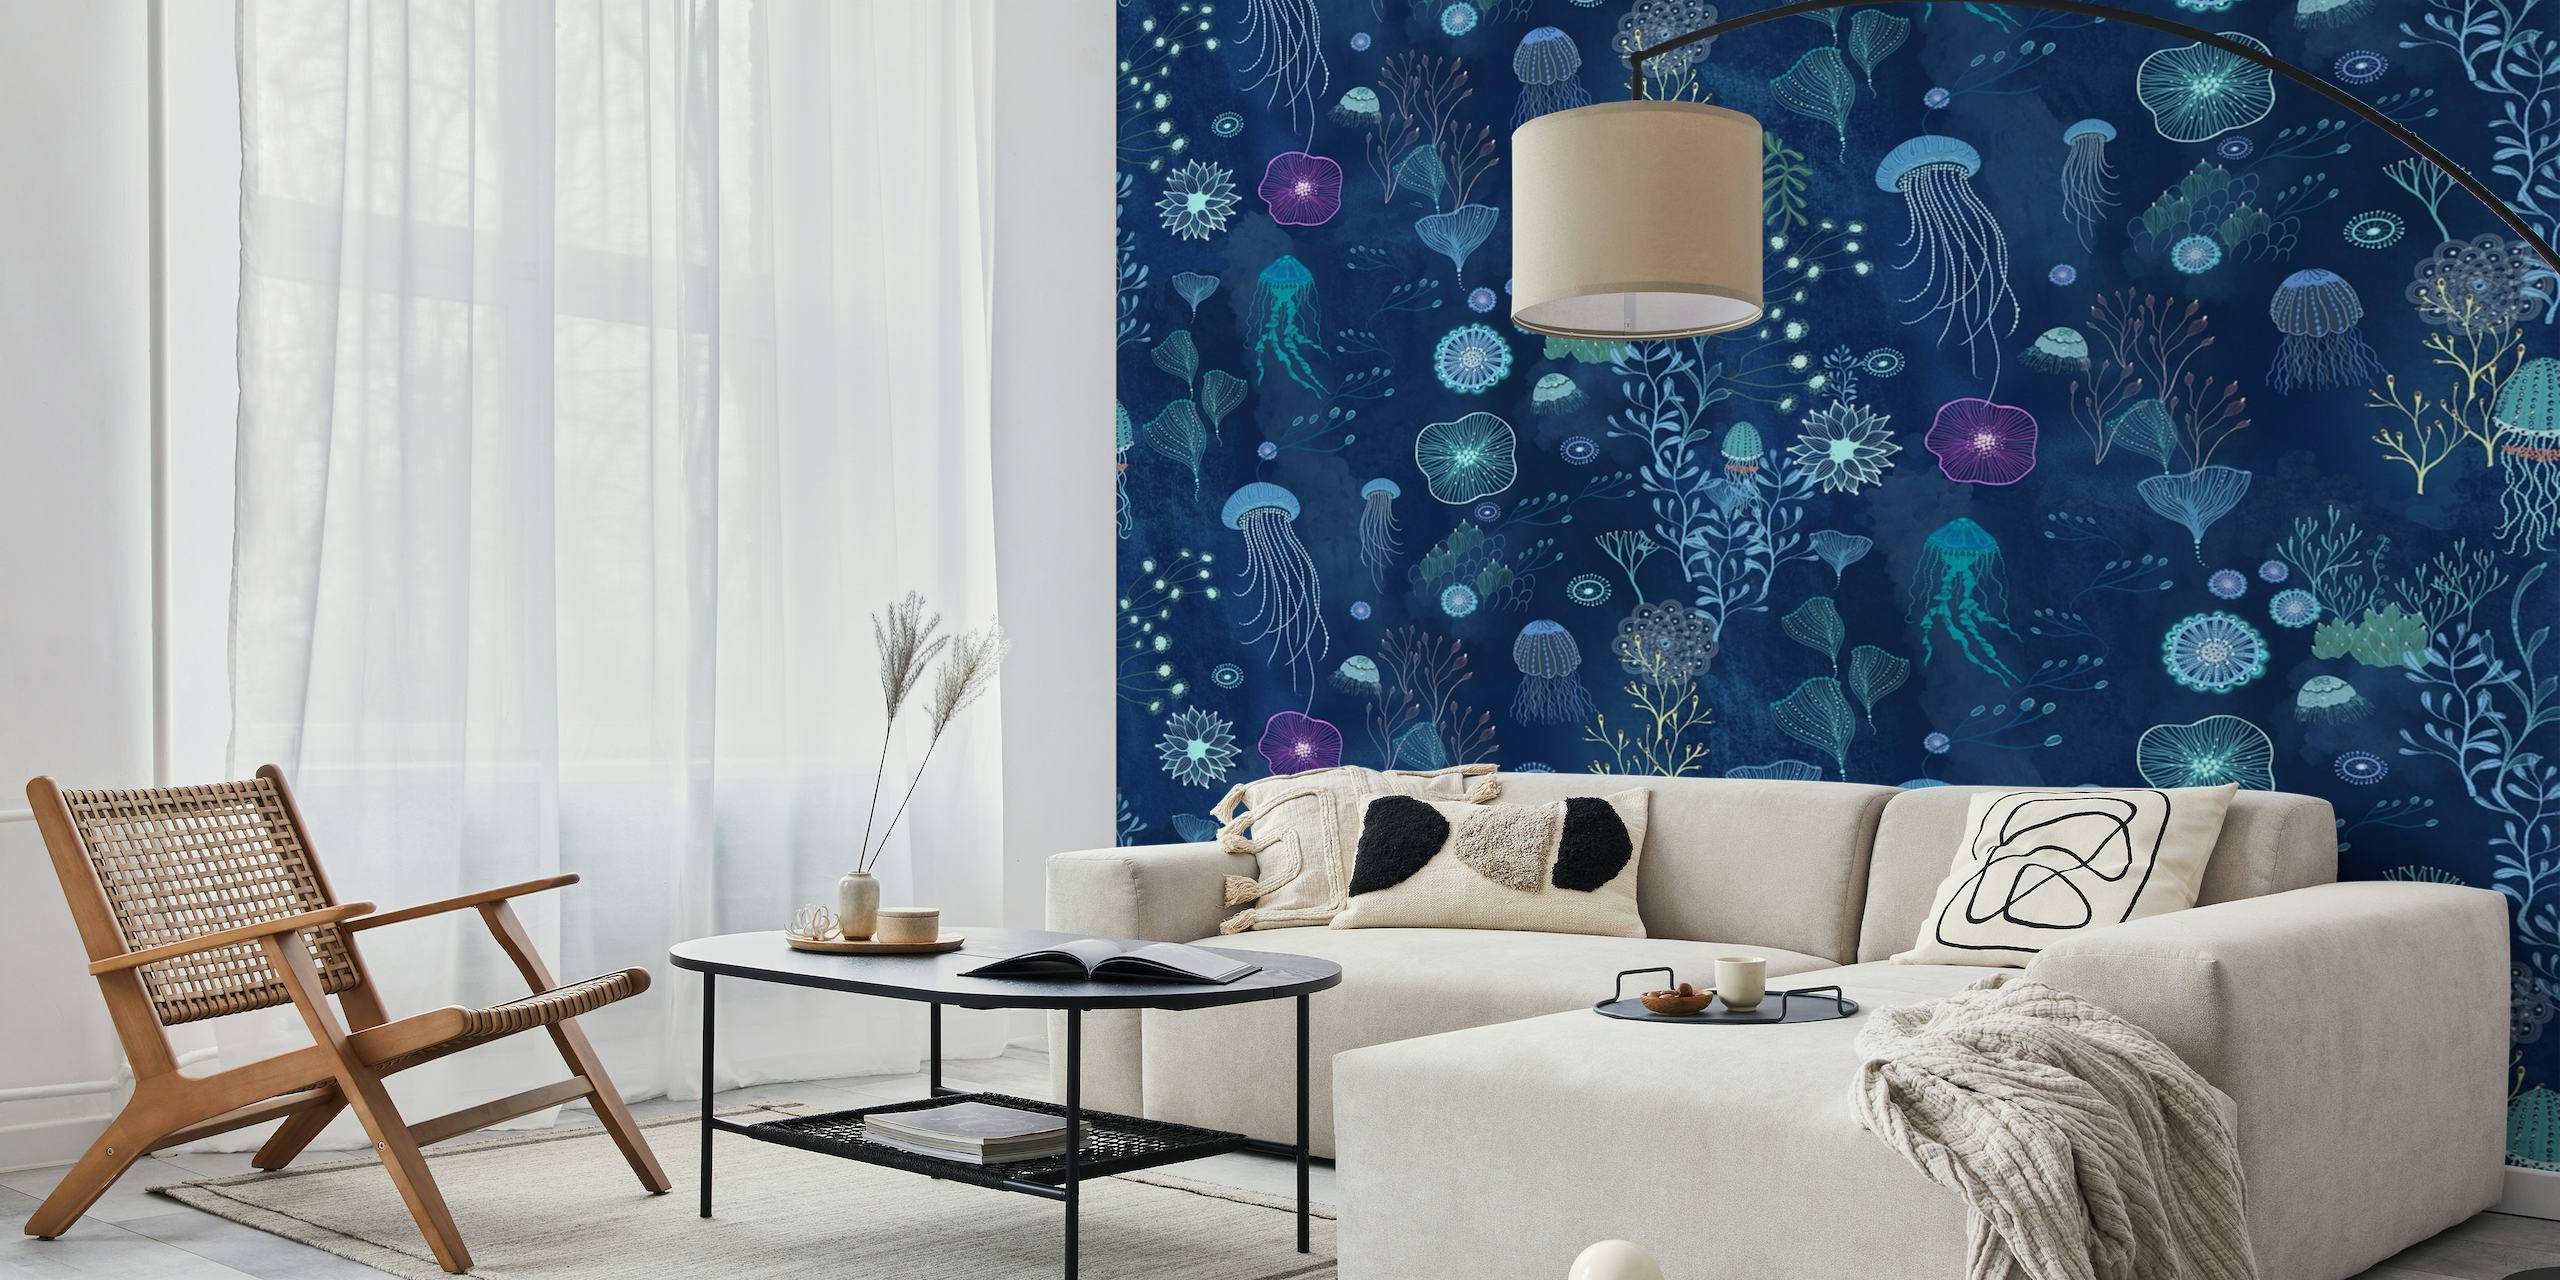 Underwater seascape with jellyfish and marine plants wall mural